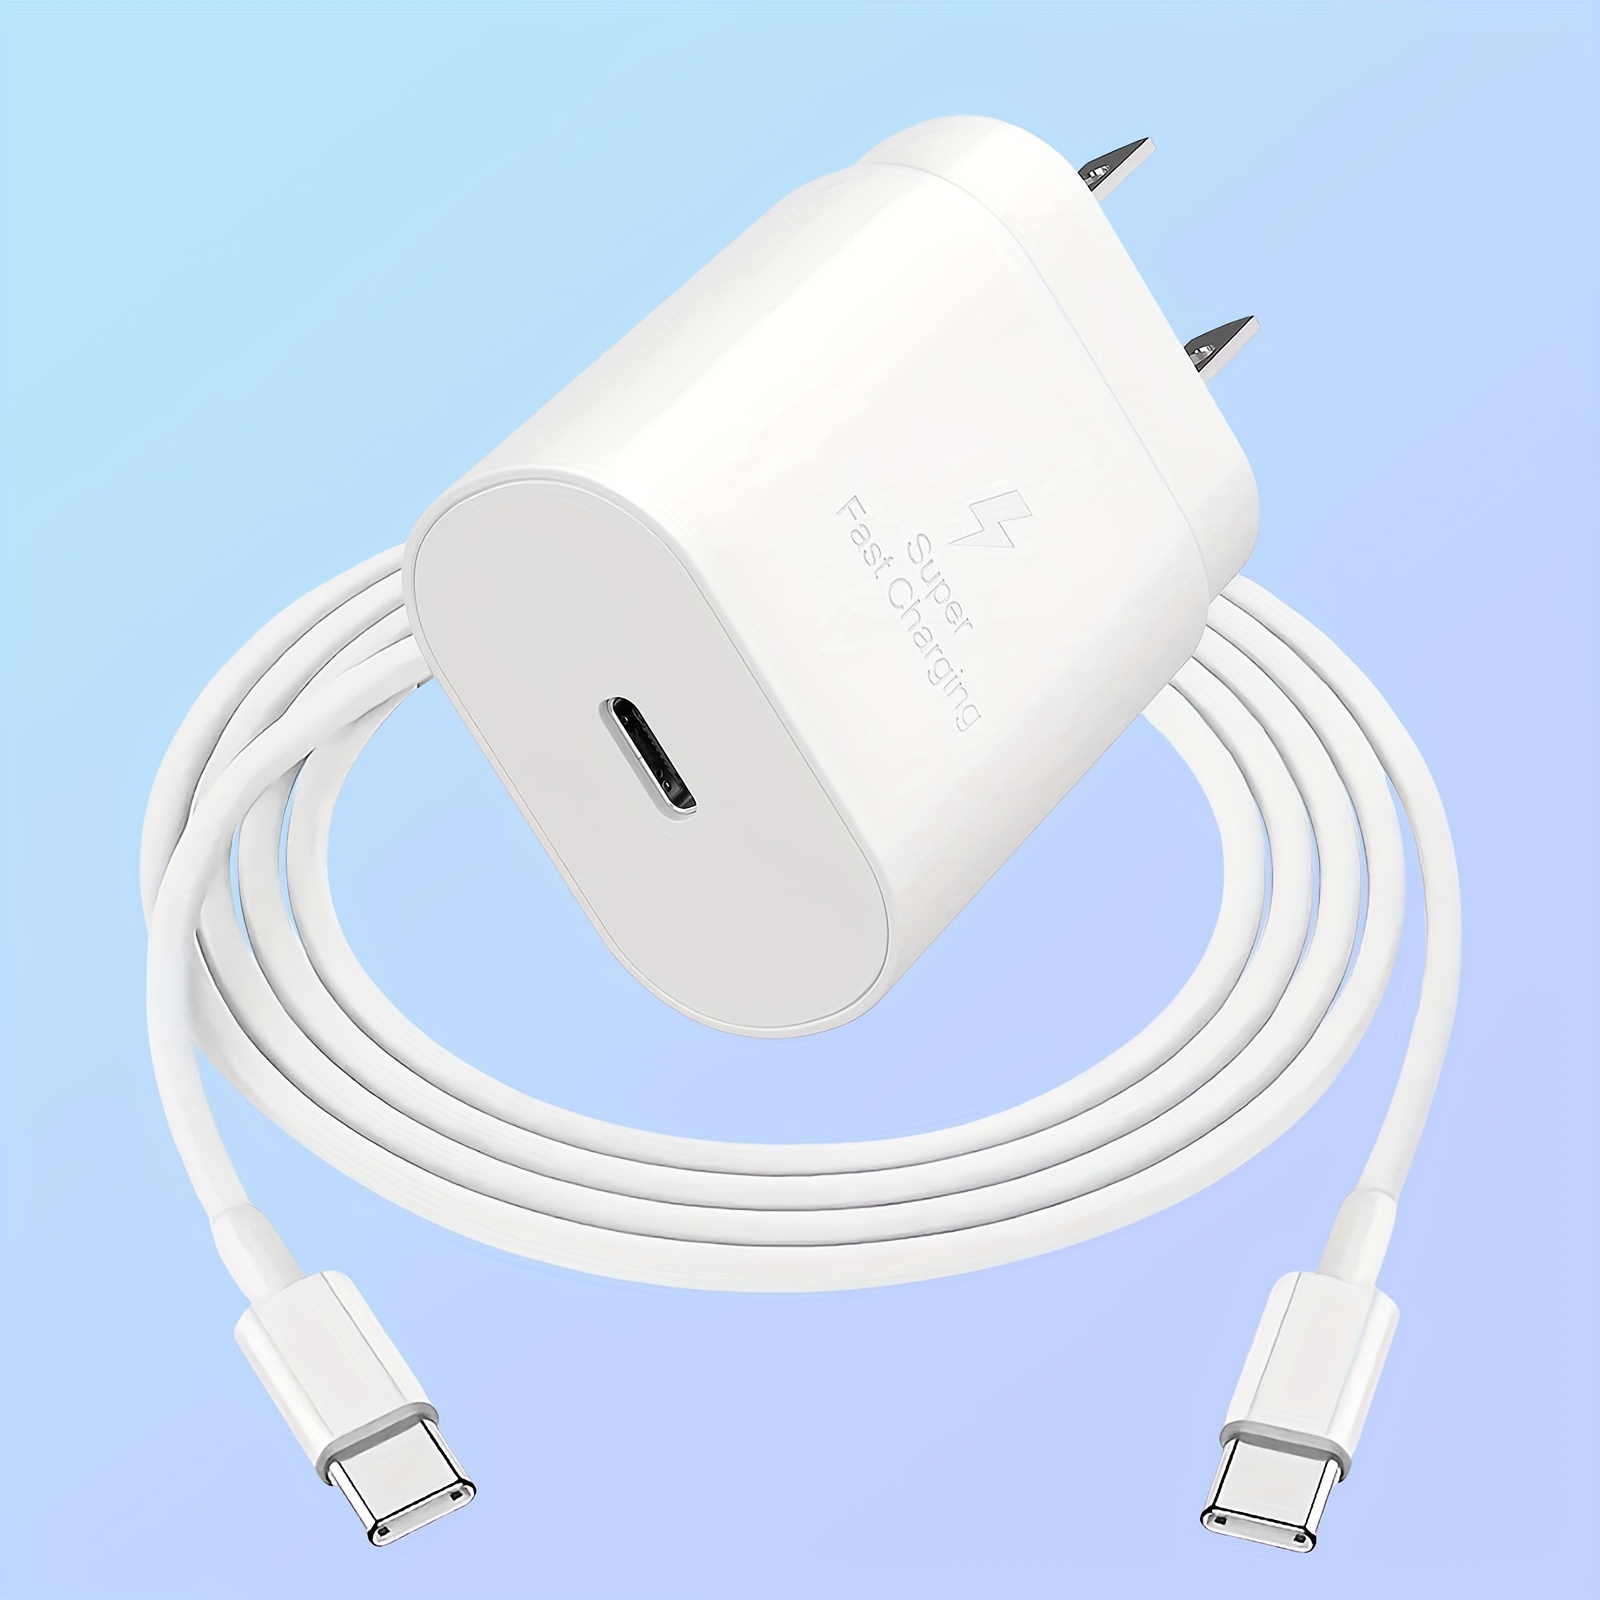 usb c charger super fast charging type c android phone charger with cable cord for samsung galaxy s23 ultra s23 s23 s22 s22 ultra s22 note 10 20 s20 s21 galaxy tab s7 s8 details 0